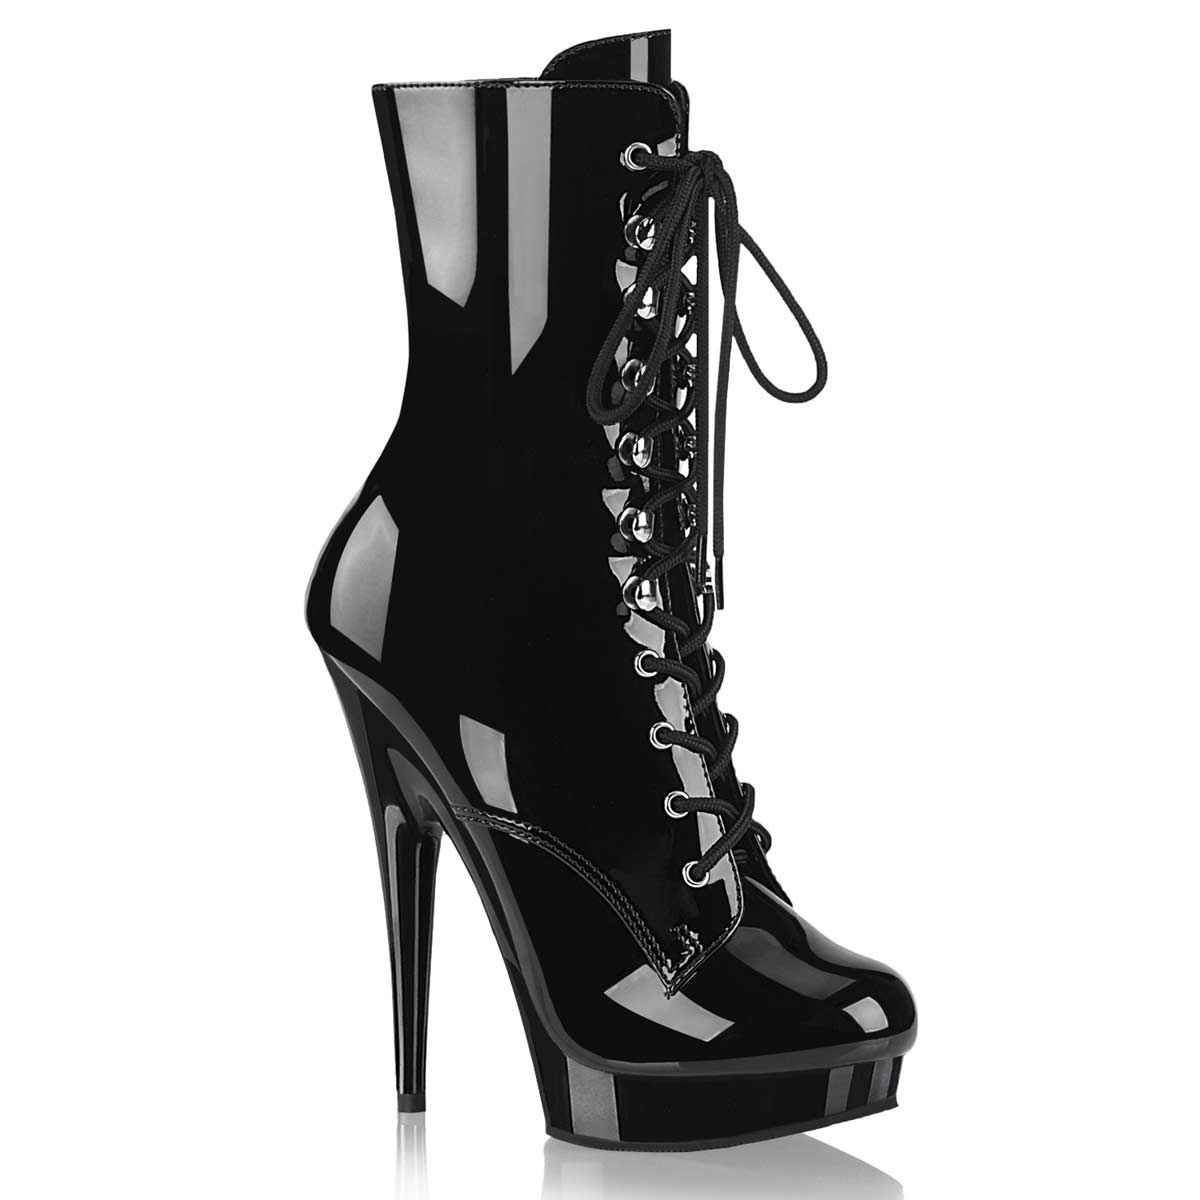 Pleaser Sultry-1020 - Black Pat in Sexy Boots - $62.47